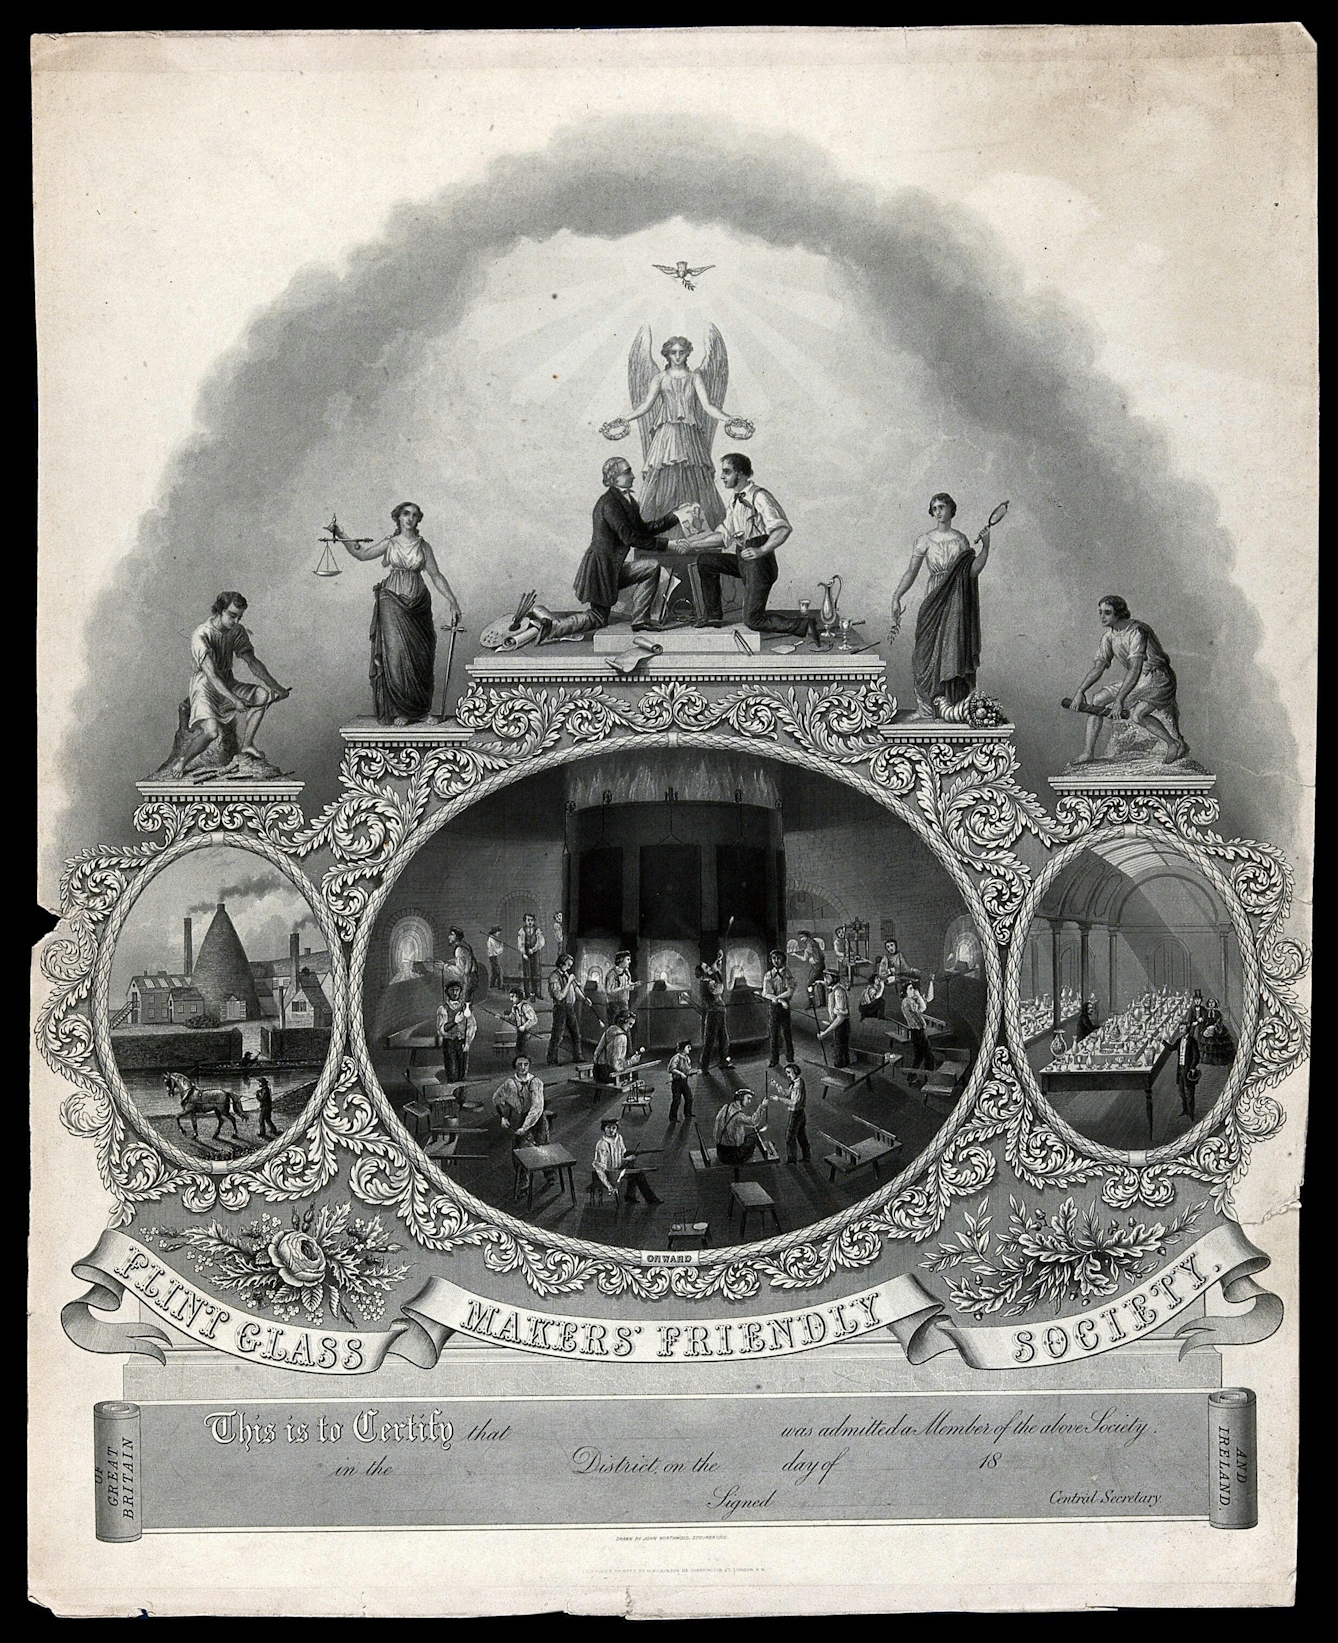 Engraving showing three plinths of different levels. On the highest, most central plinth, there are two men kneeling down, facing one another and shaking hands. In the center there is a winged angel holding two wreaths above each of the man's heads. Behind the angel is a flying dove and a beaming sun, suggestive of the heavens. On the lower plinths there are two women in long dresses. One is holding a sword and old-fashioned weighing scales and the other is holding a hand mirror and a small tree branch. On the lowest, outer plinths are two men holding wood or sticks who appear to be working. They are facing the highest plinth. Underneath the plinths is a sign that reads 'Flint glass makers' friendly society'. Above this text are three small images which appear to depict different stages of the glass-making process.  